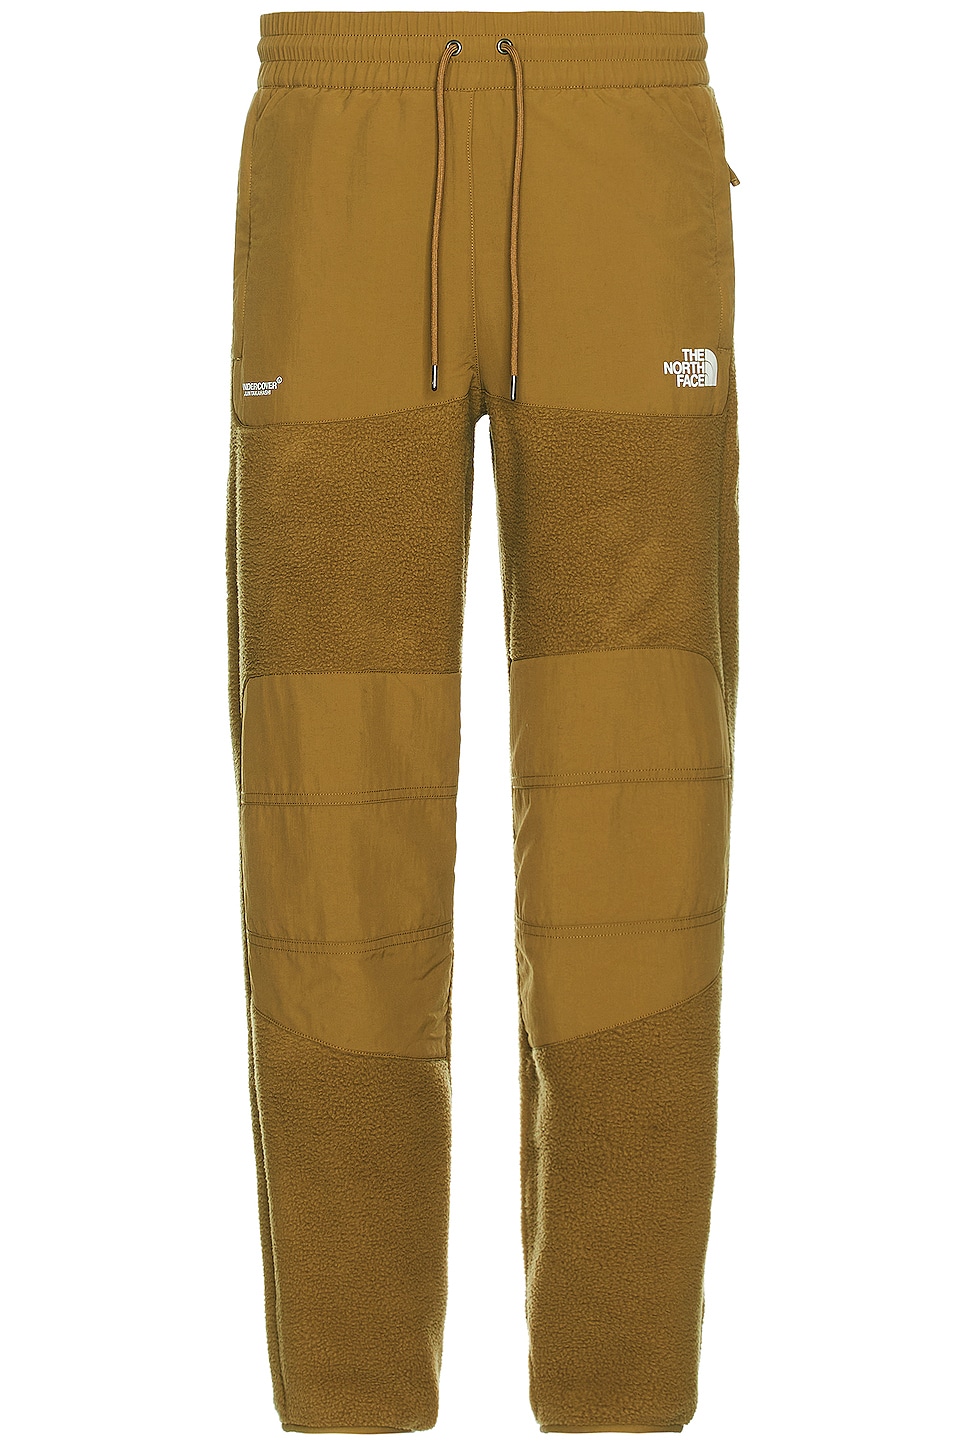 Image 1 of The North Face X Project U Fleece Pants in Butternut